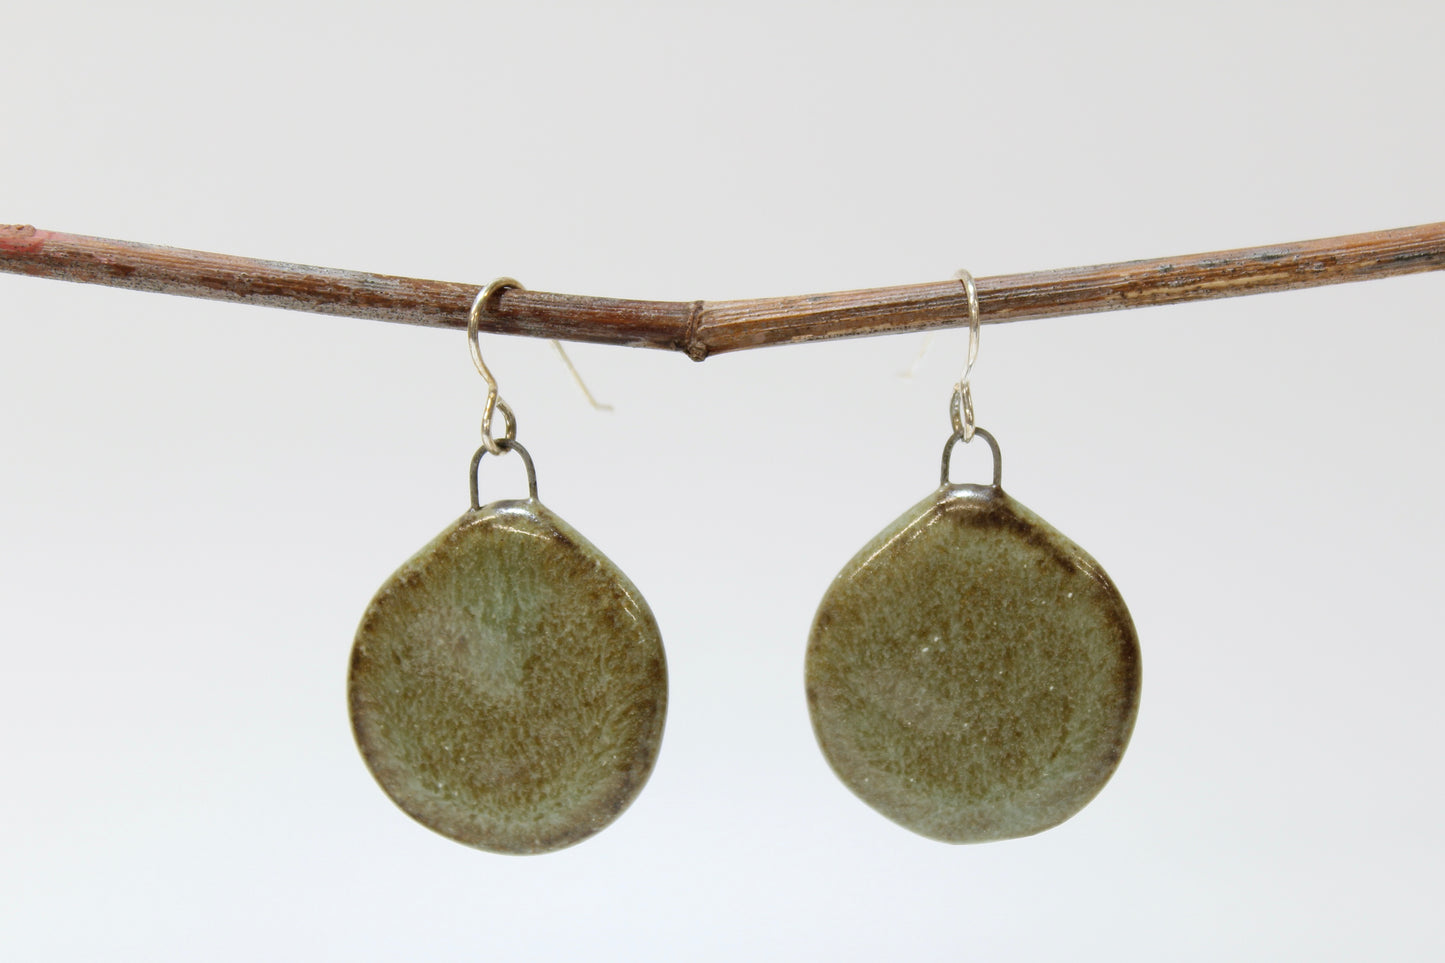 218. Flat Dangly Earrings with Turquoise Glaze. 1.5" x 1"